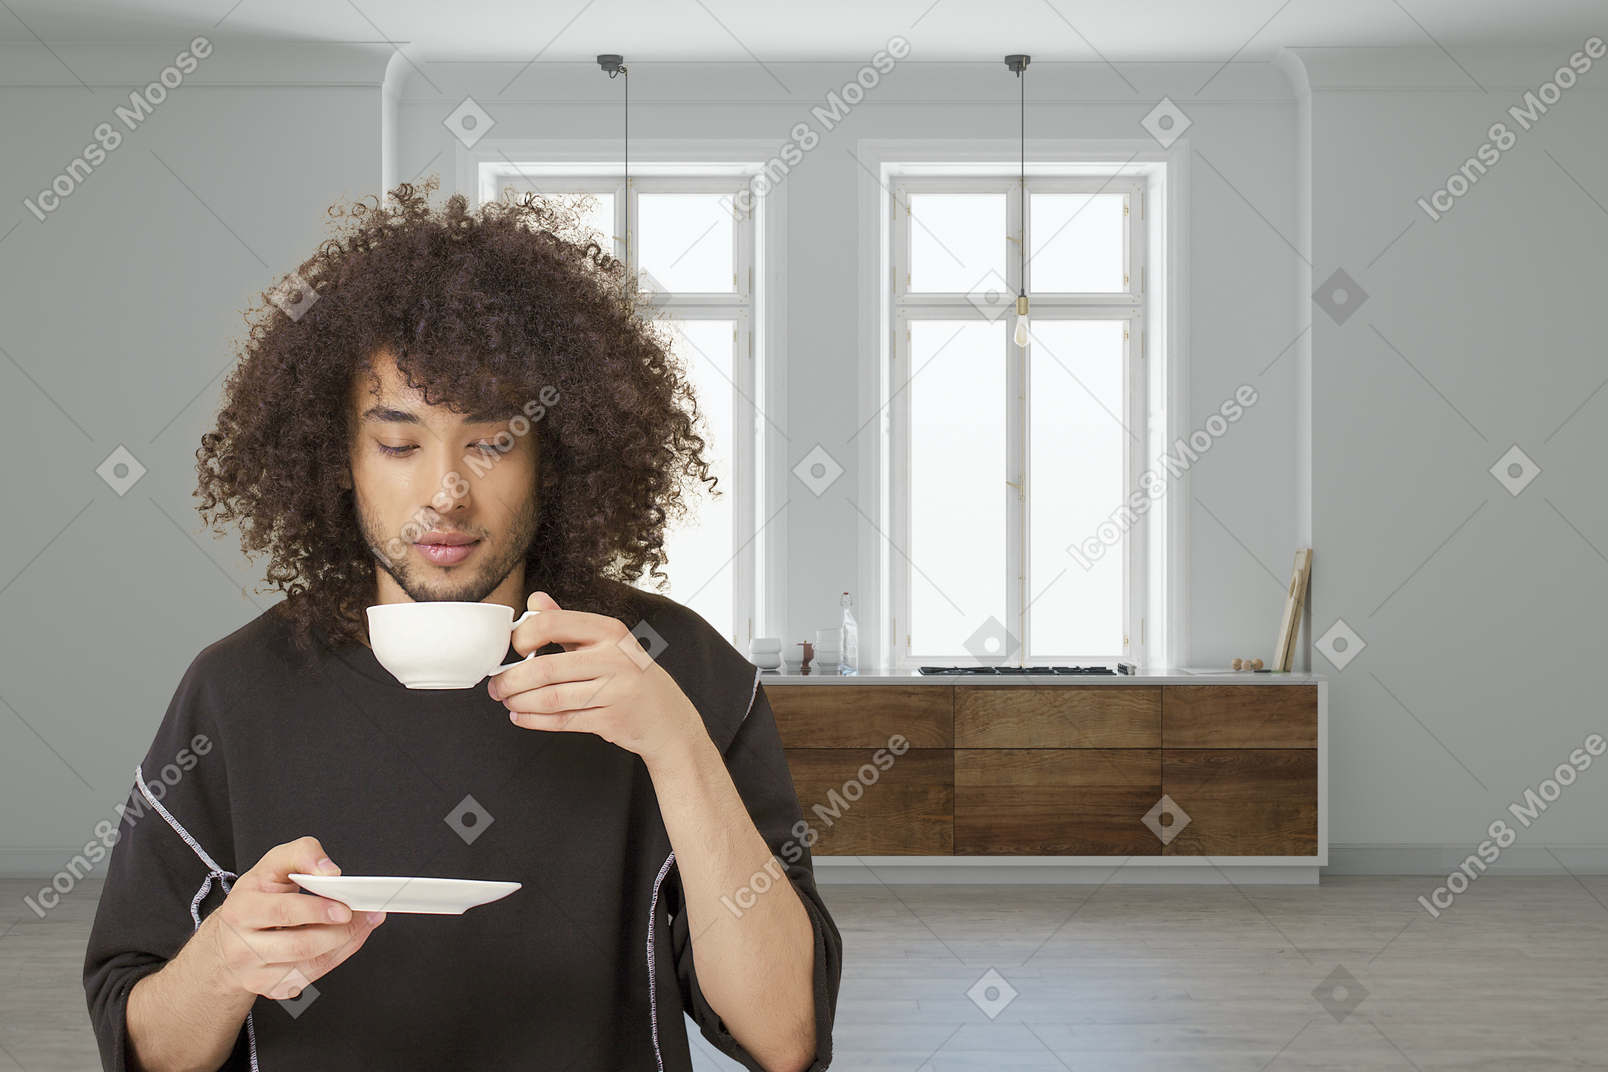 A man drinking a cup of coffee